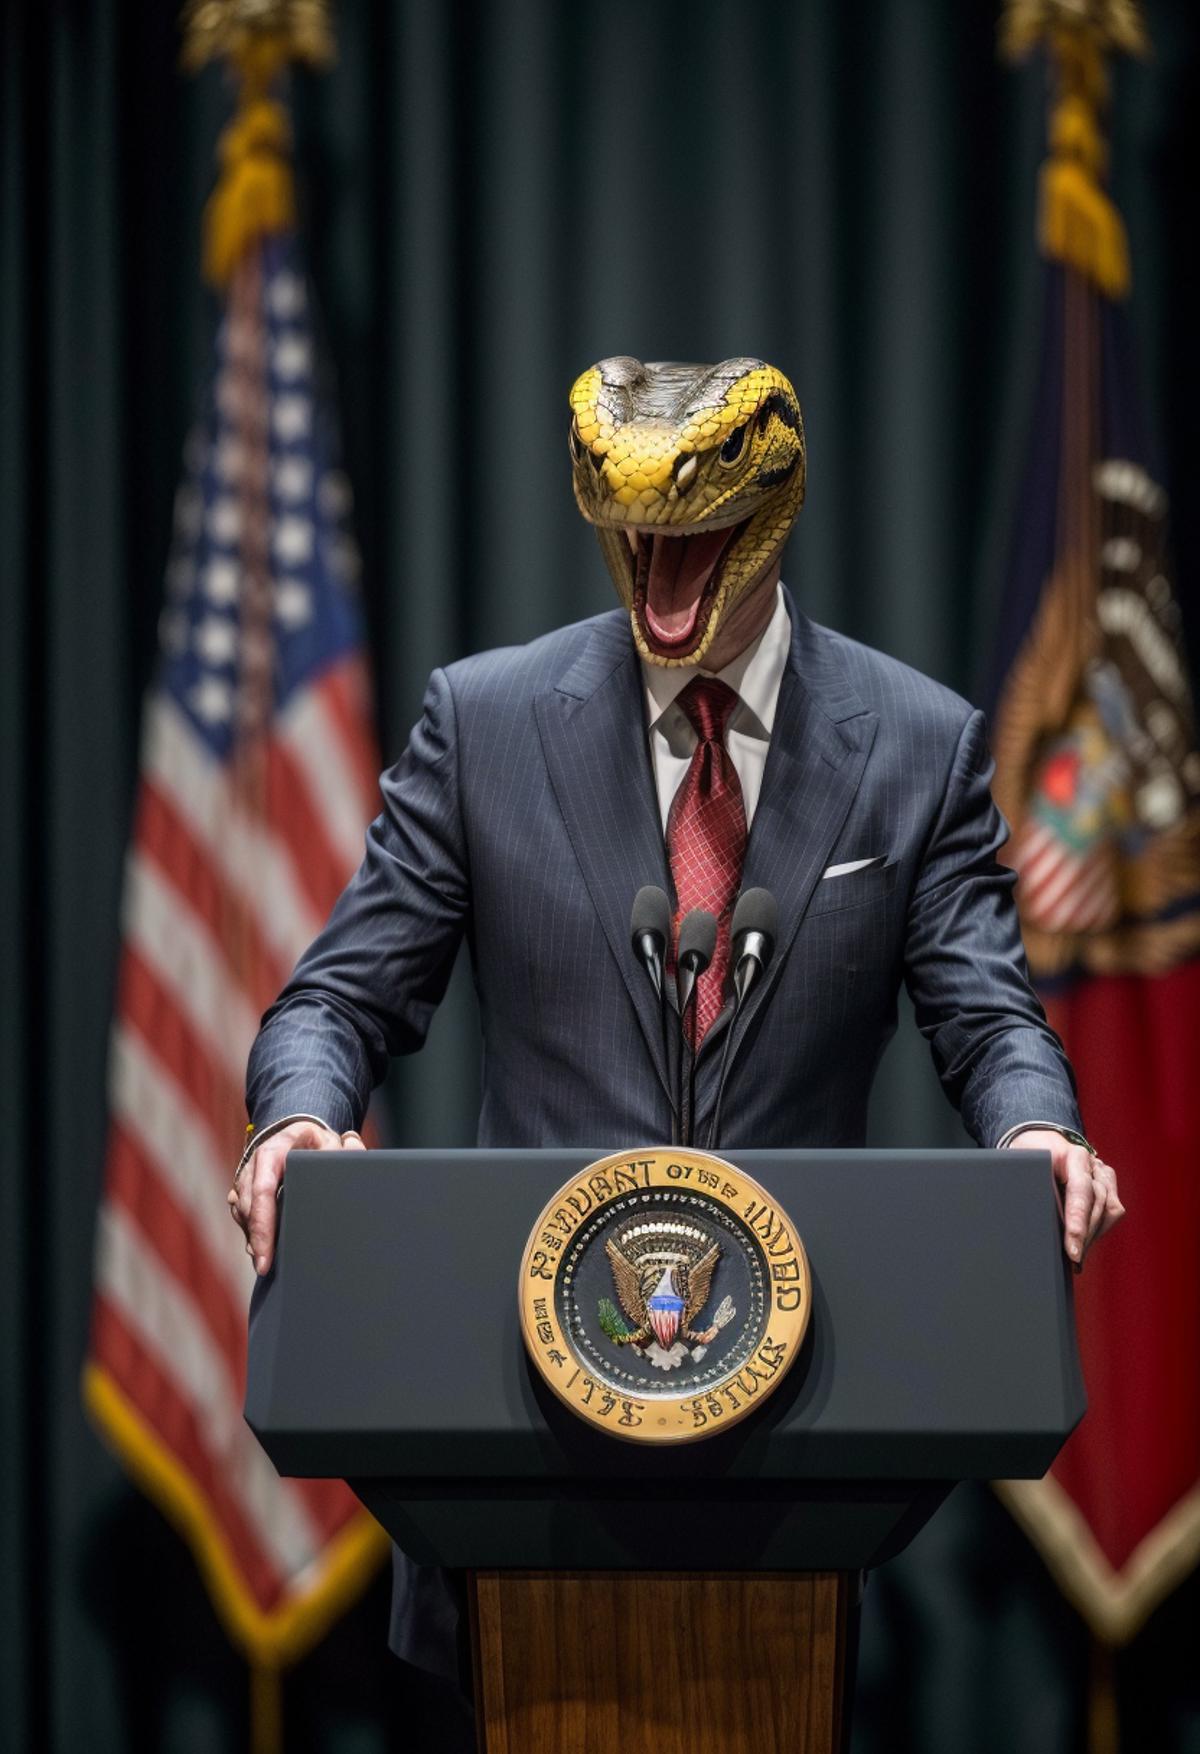 A man in a suit with a snake mask on, giving a speech at a podium.